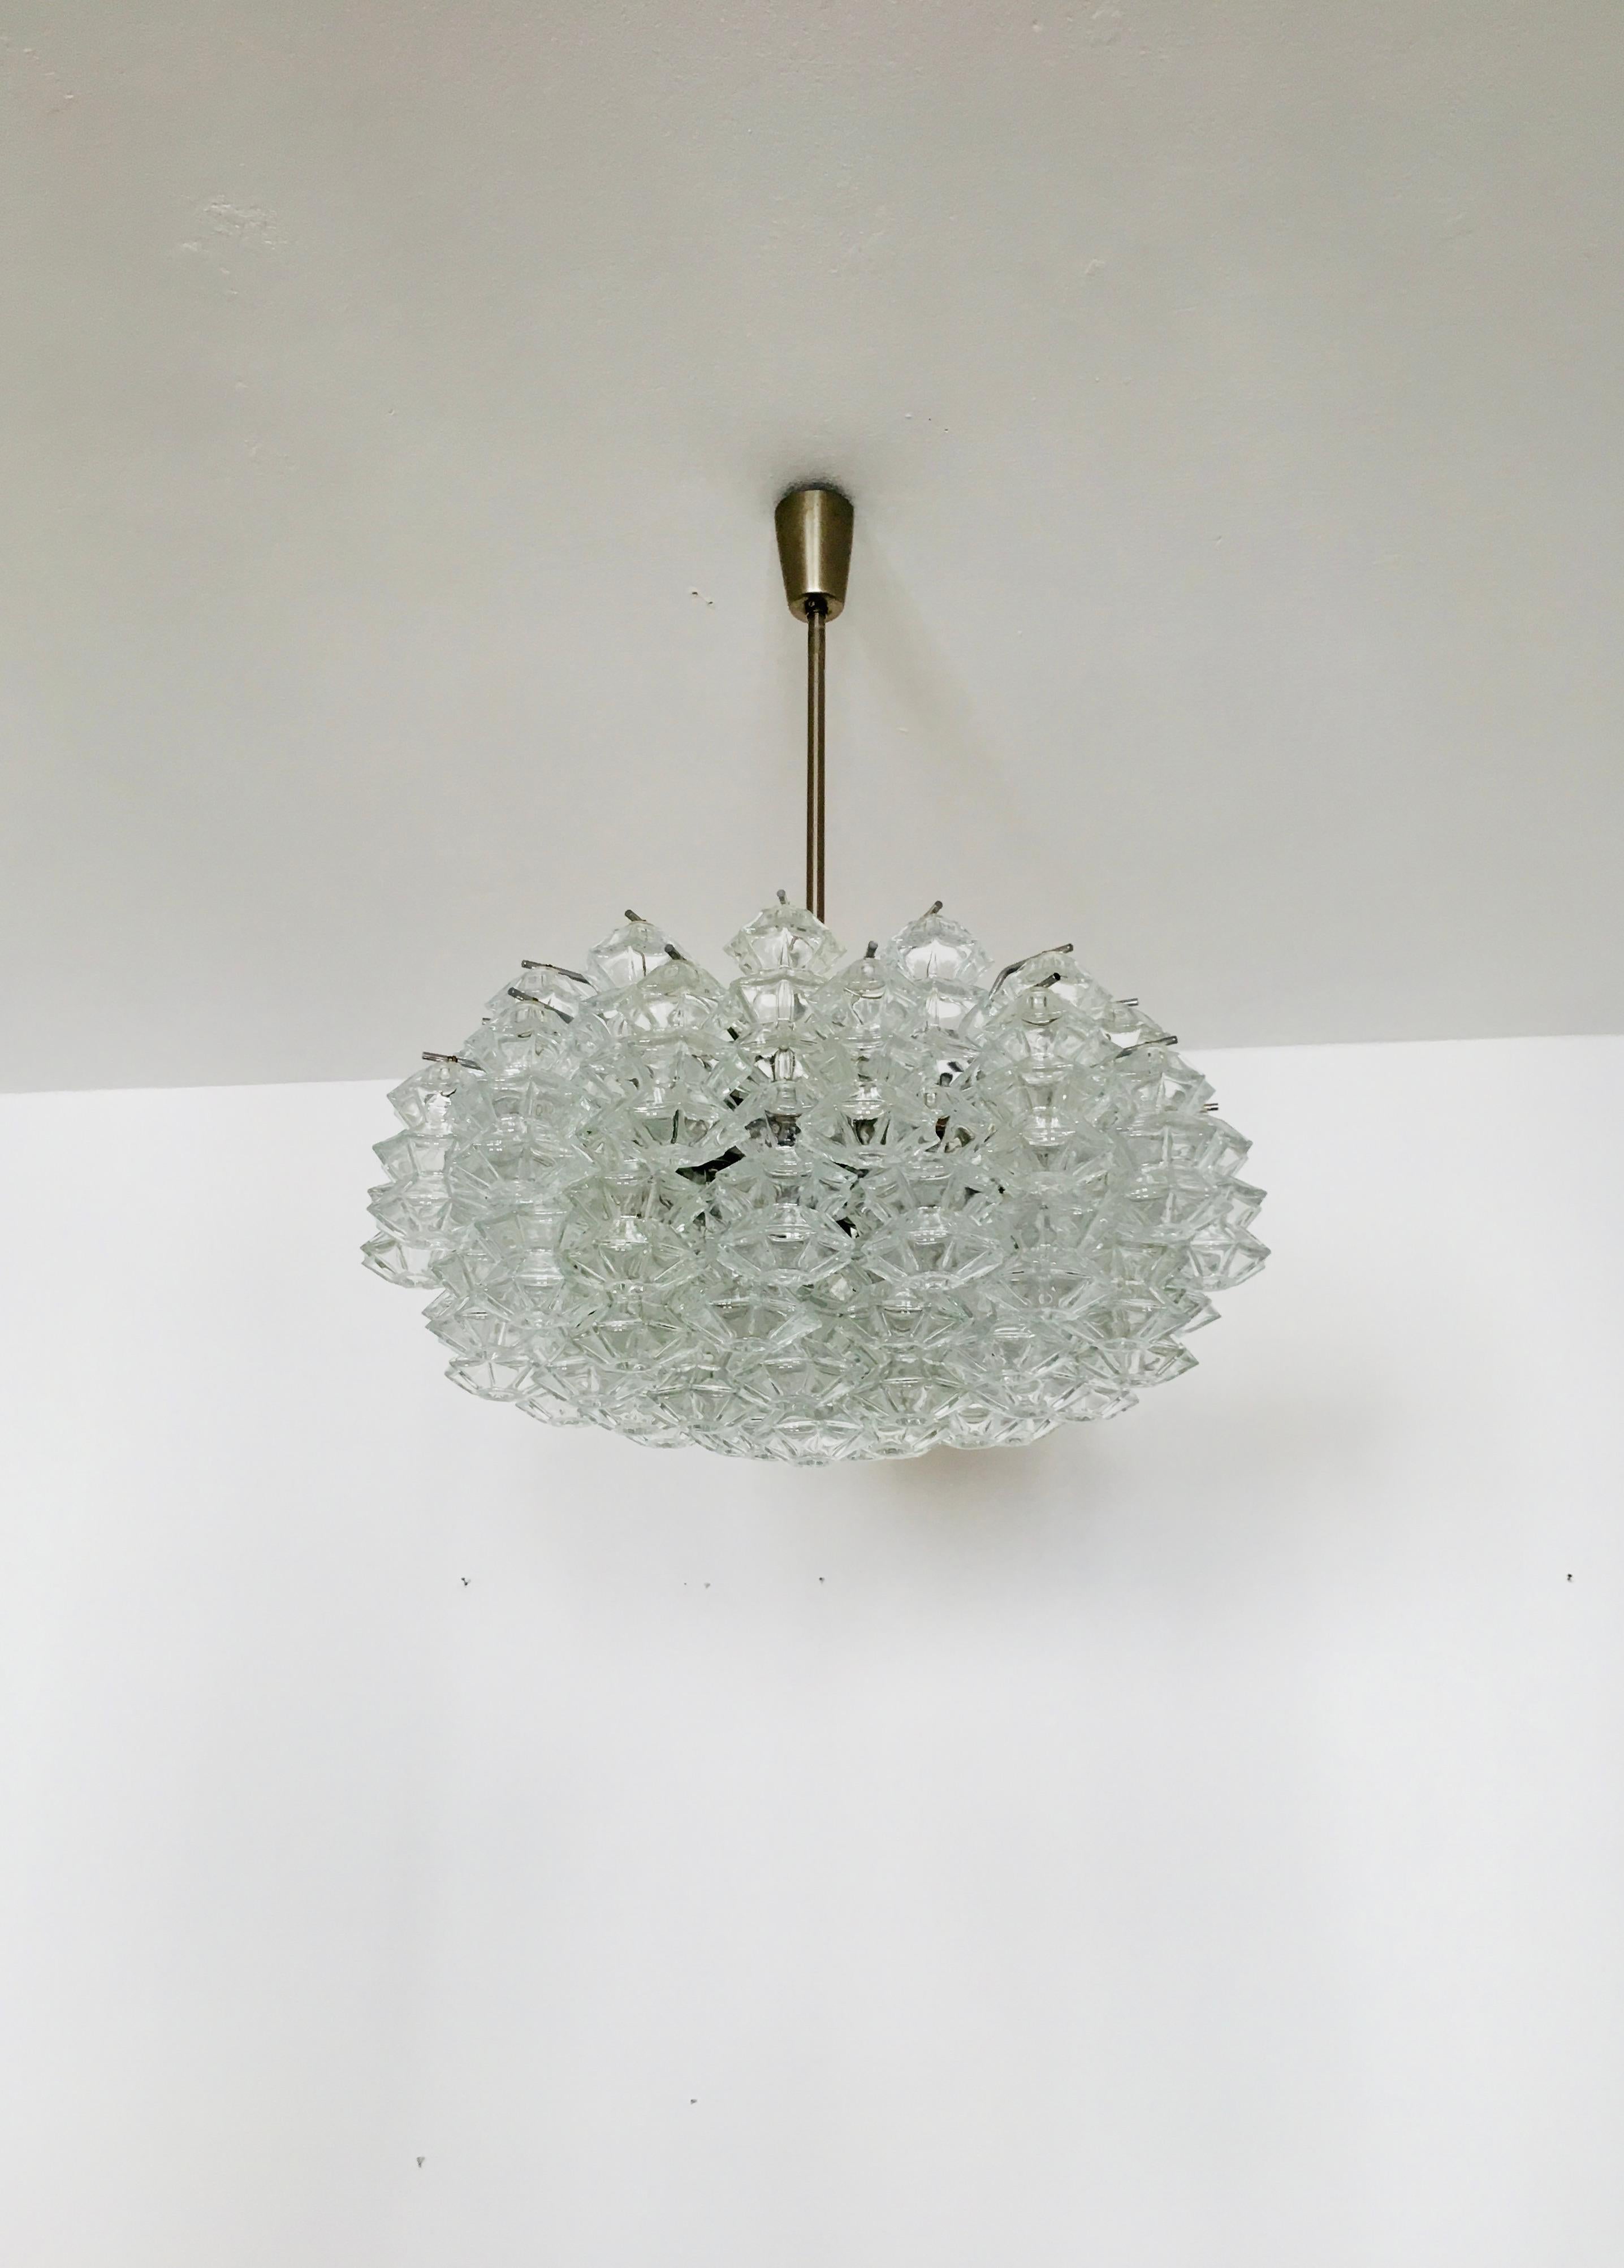 Extremely beautiful and large chandelier from the 1960s.
The 62 beautifully shaped Murano glass elements create an impressive, sparkling play of light.
Very rare version as a chandelier.
Very high-quality workmanship and a real eye-catcher for